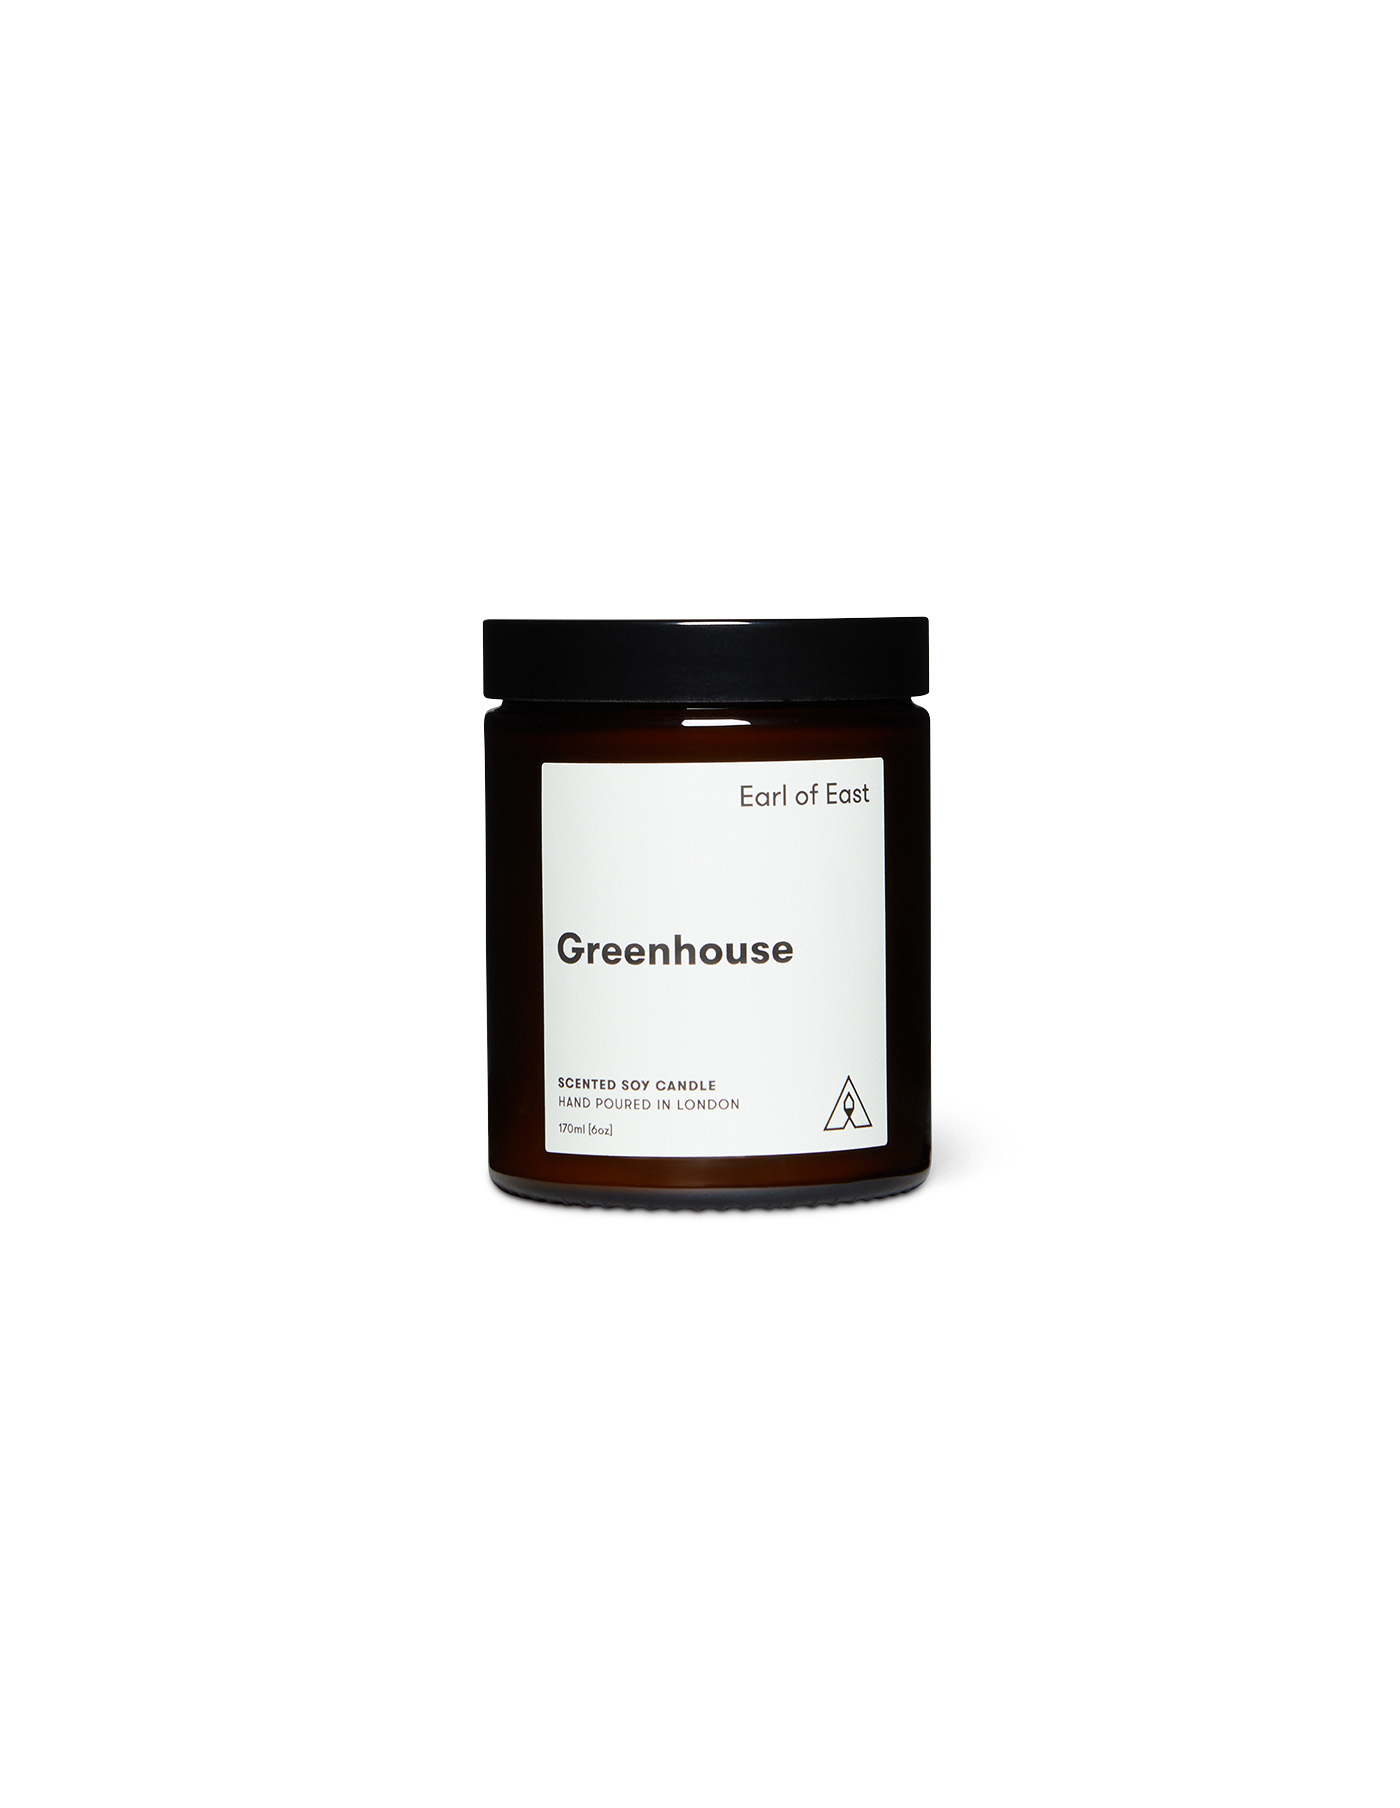 Earl of East London Greenhouse Soy Wax Candle